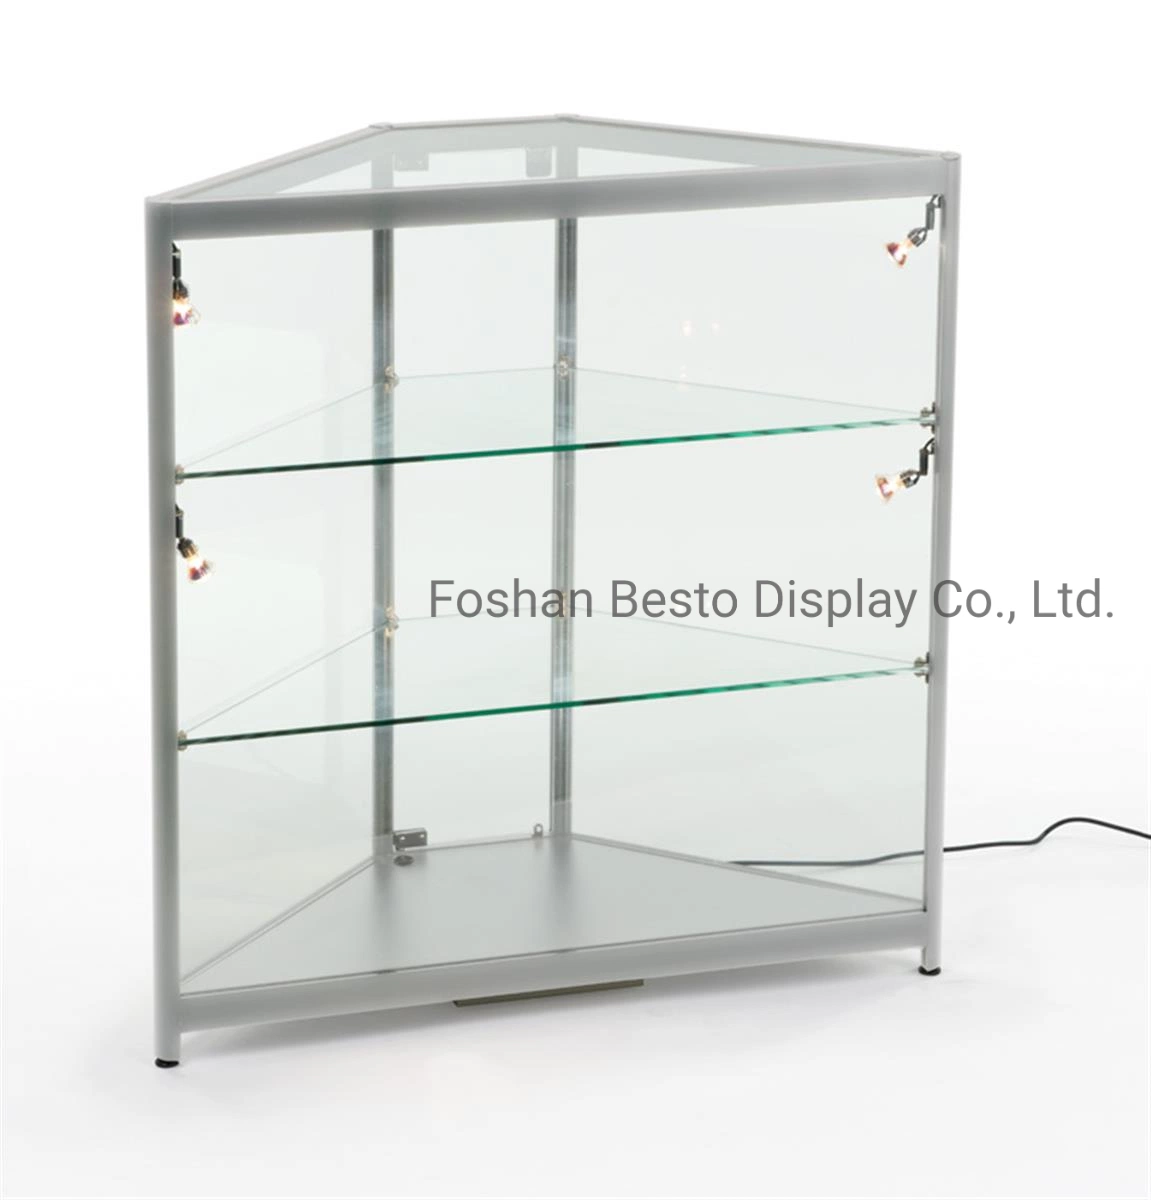 Retail Display Glass Showcase Corner Cabinet with Lock and Adjustable Glass Shelves for Retail Store Display, Jewelry Display, Makeup Display, Museum Display